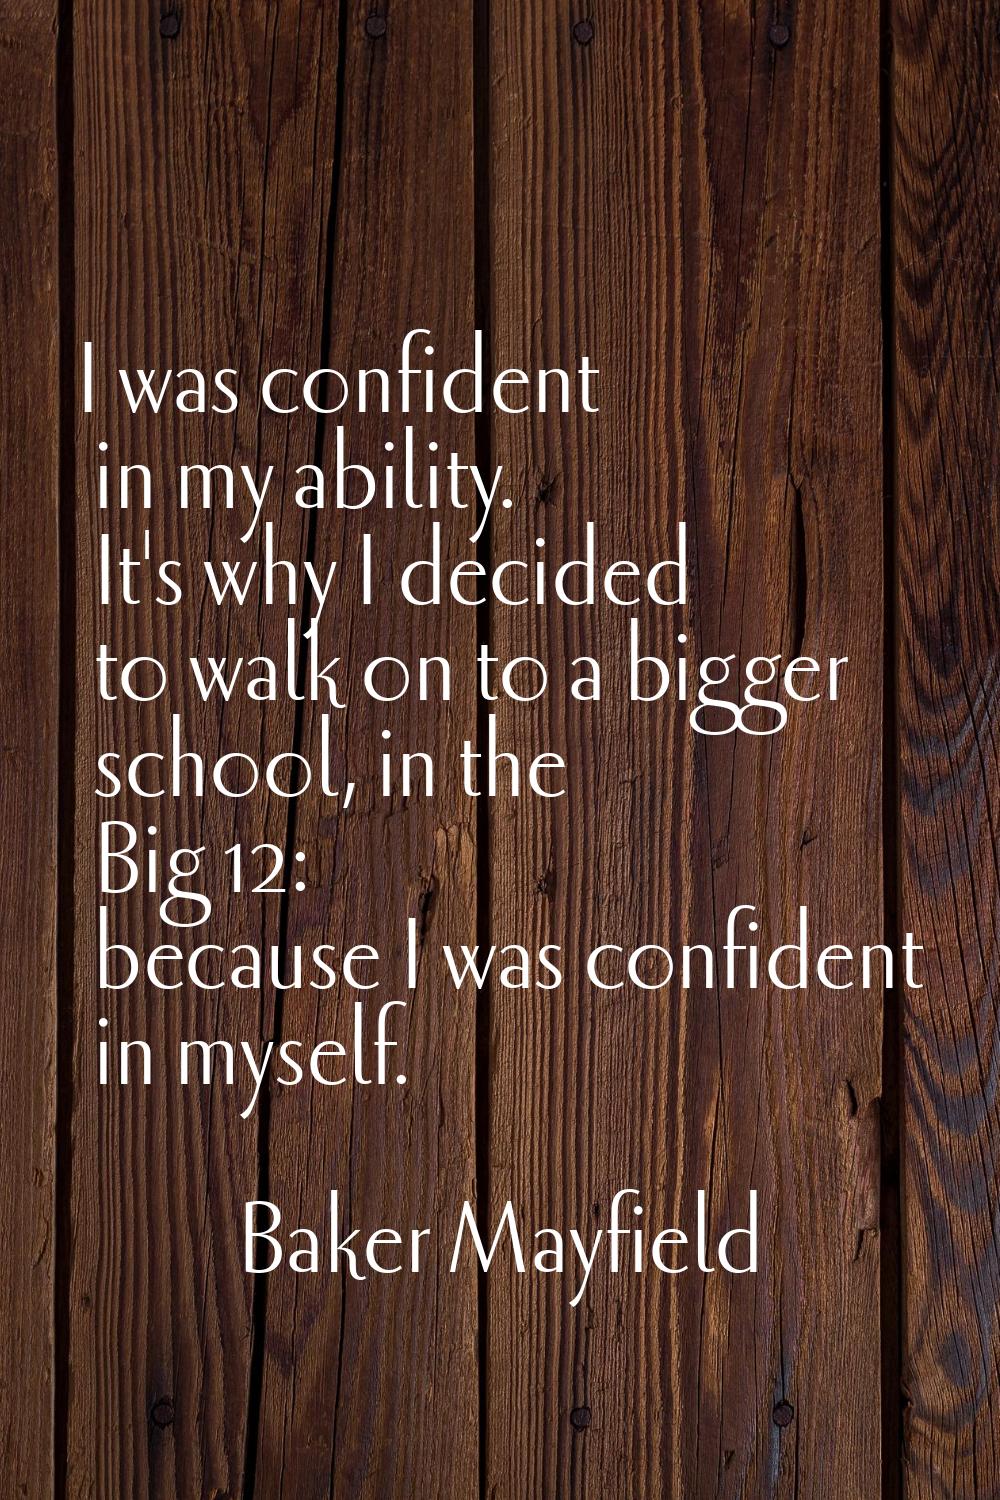 I was confident in my ability. It's why I decided to walk on to a bigger school, in the Big 12: bec